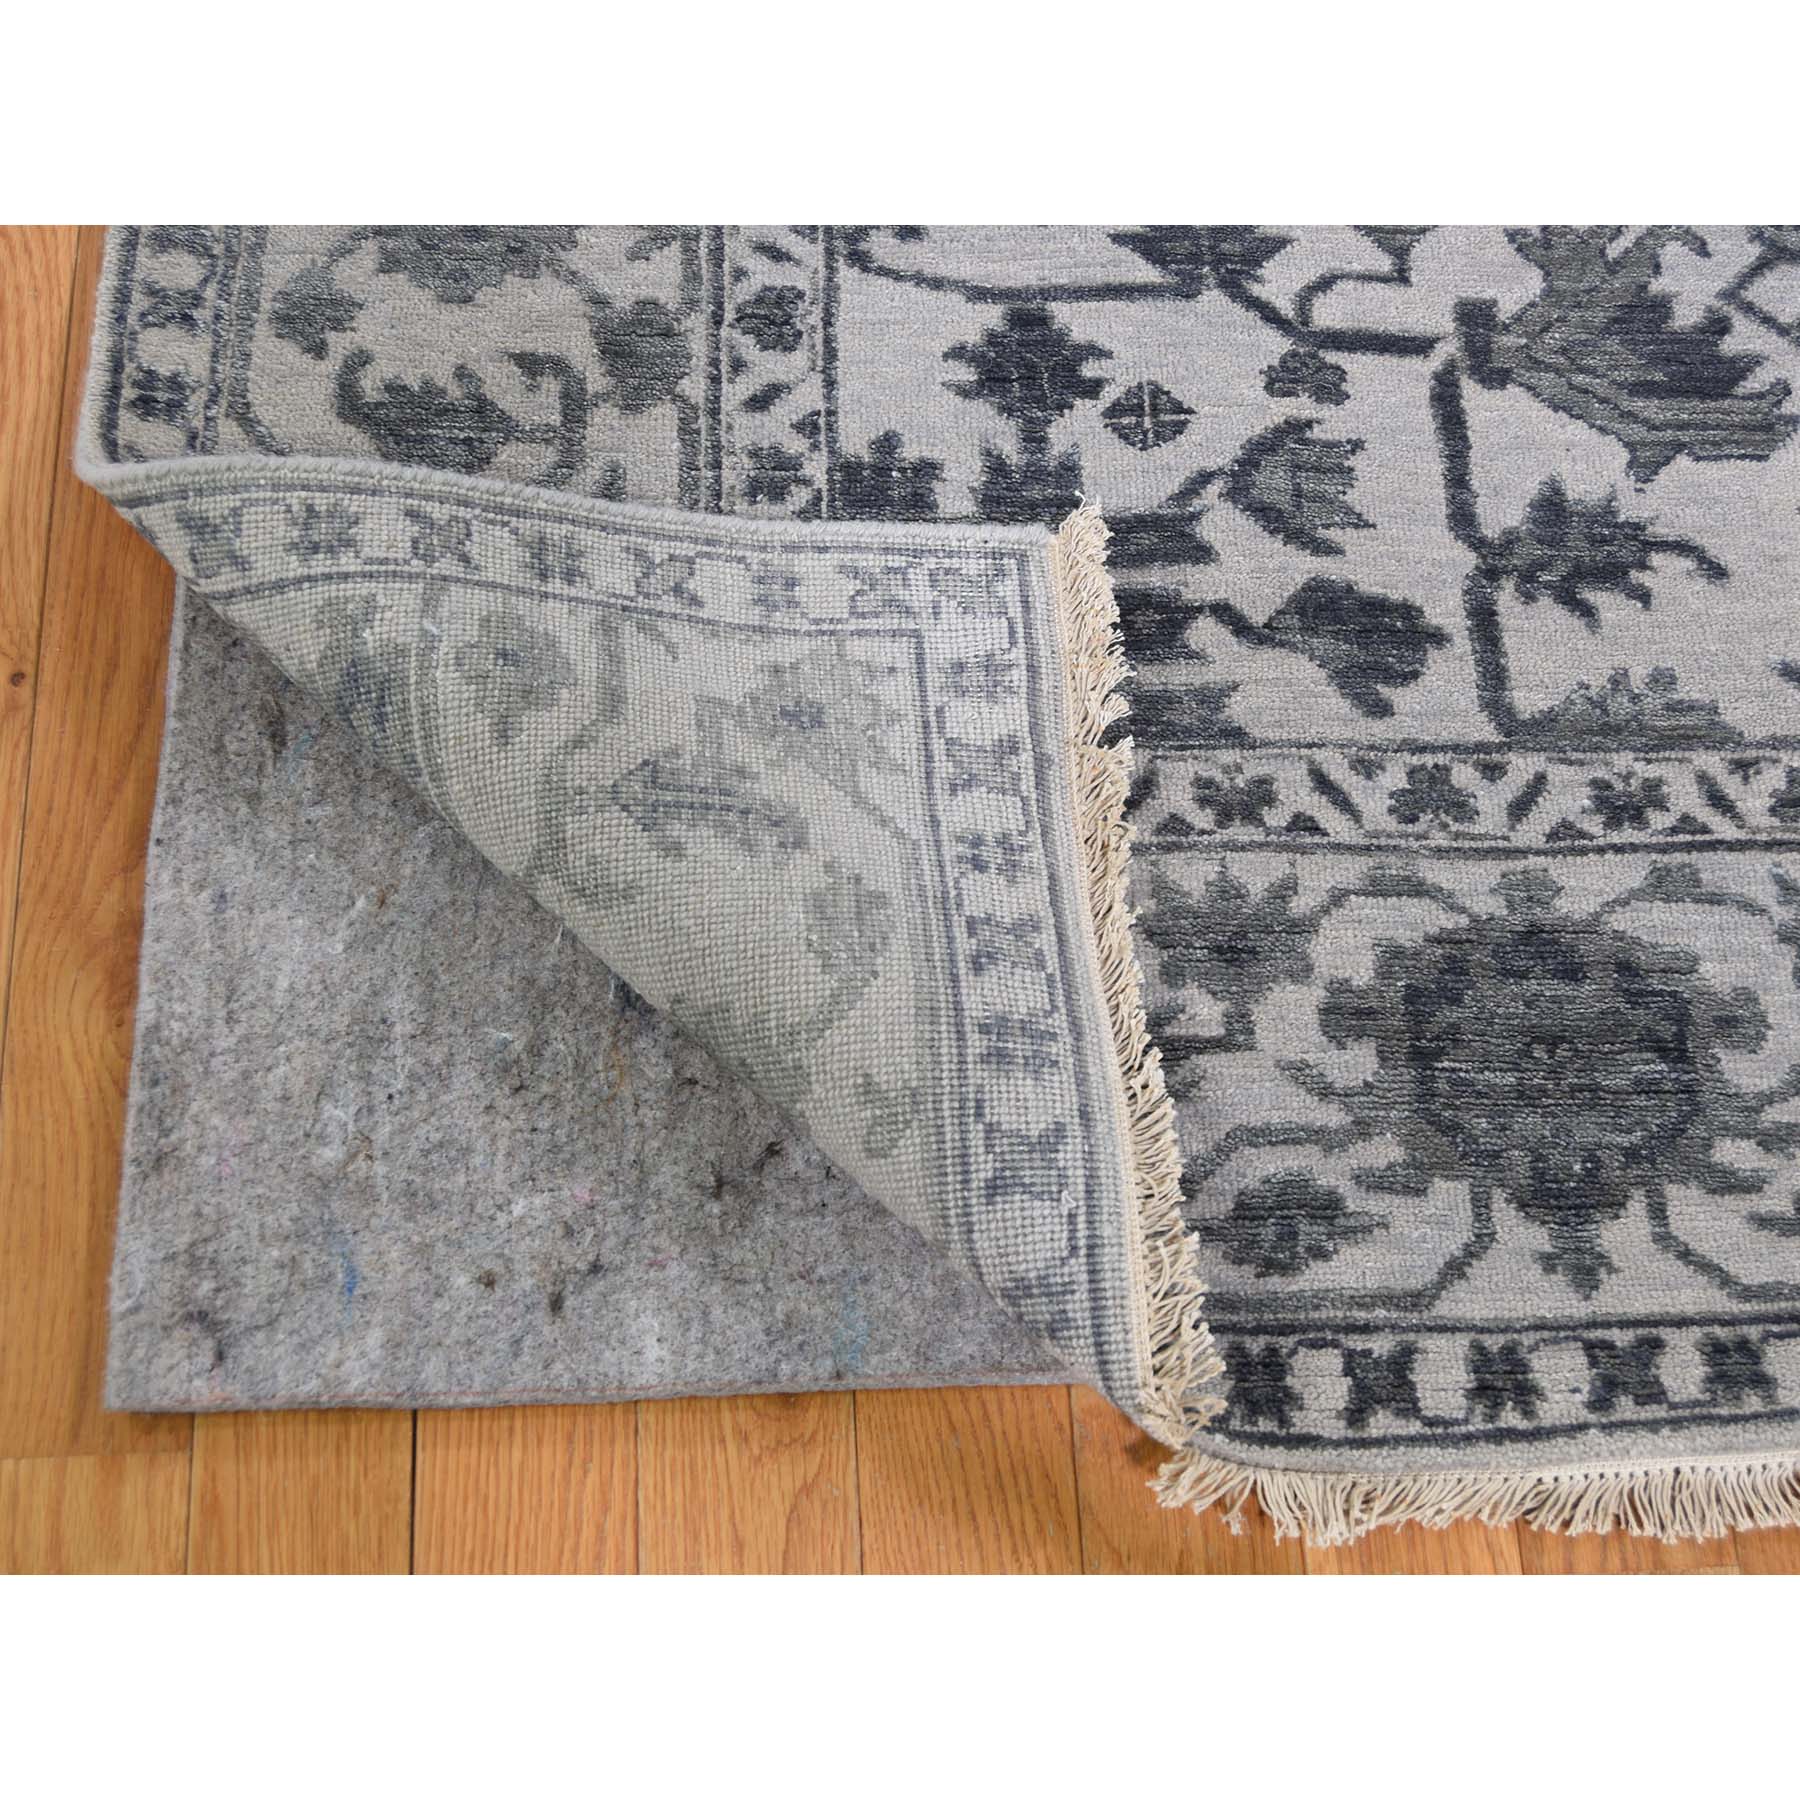 8-1 x10-1  Silver Heriz Design Wool And Silk Hi-lo Pile Hand-Knotted Oriental Rug 